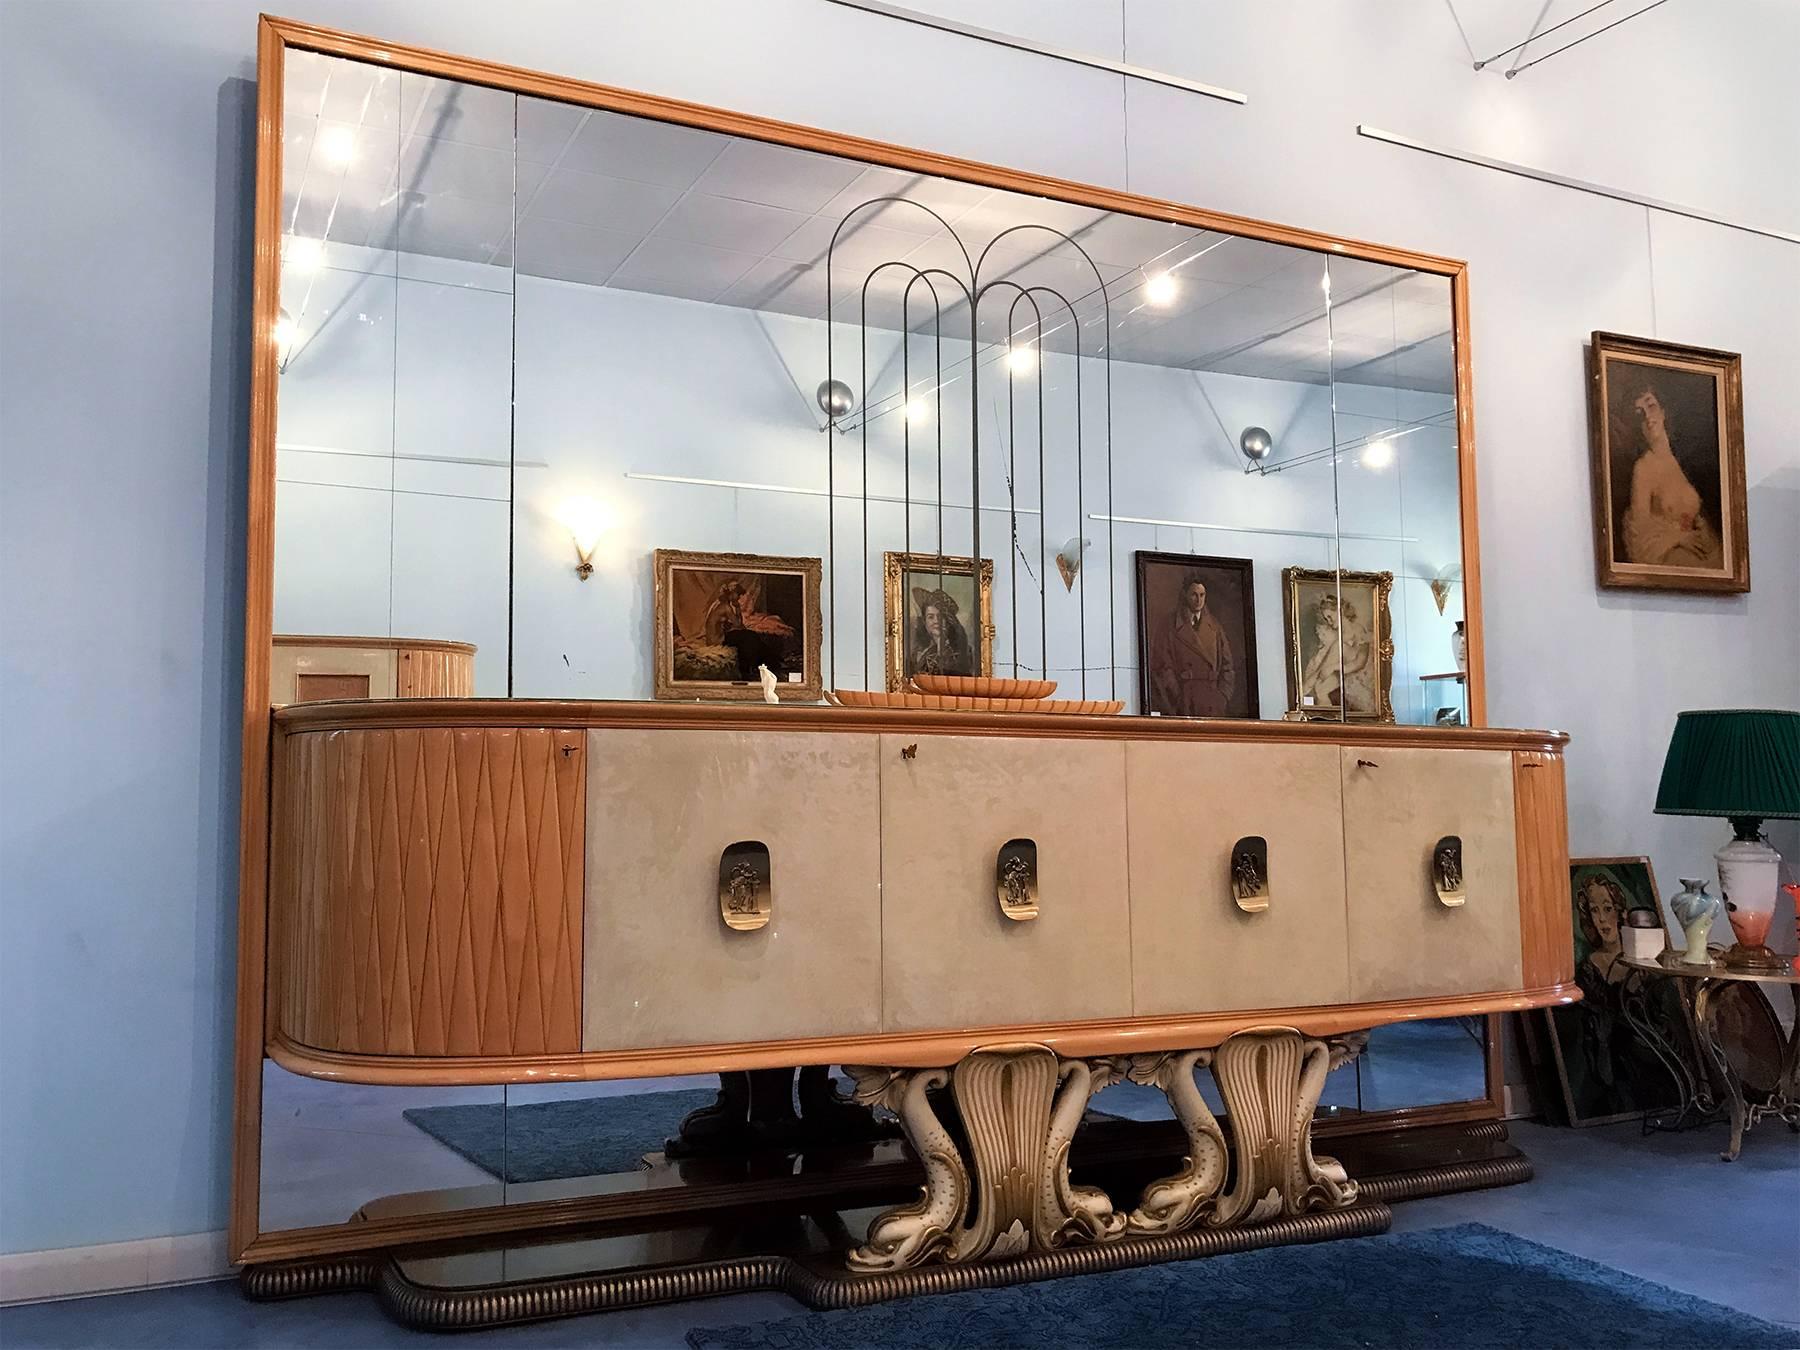 Spectacular mirrored sideboard in parchment and maple designed by Osvaldo Borsani in the 1940s, with splendid movement of the lines on the front, glass top, marble base, insides in maple. Magnificent mirror on the back depicting a spouting fountain.